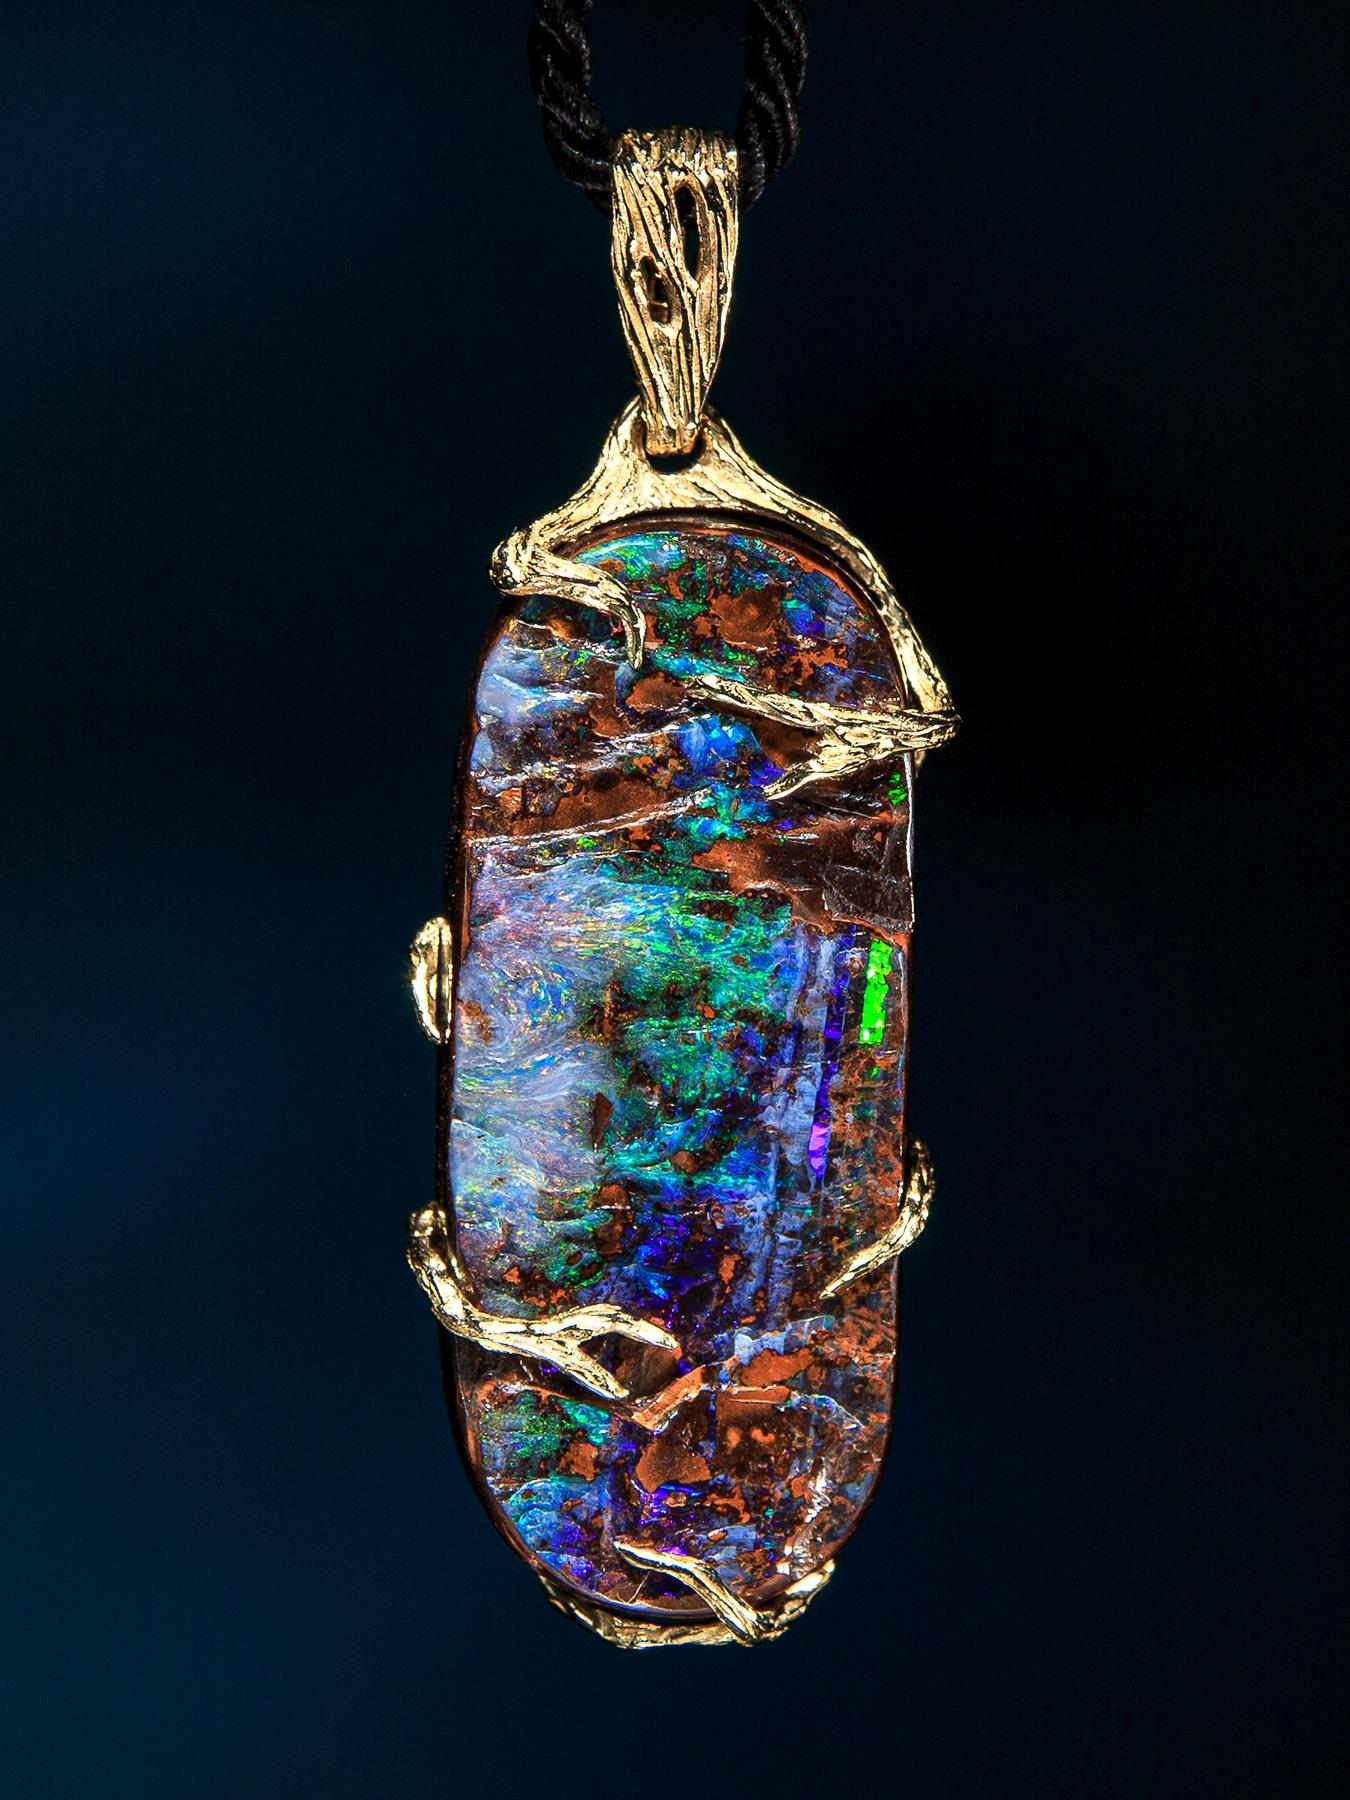 14K yellow gold necklace with natural boulder Opal
opal origin - Australia
opal measurements - 0.16 х 0.55 х 1.34 in / 4 х 14 х 34 mm
opal weight - 32 carats
pendant  weight - 10.79 grams 
pendant length - 1.85 in / 47.10 mm

Roots collection


We